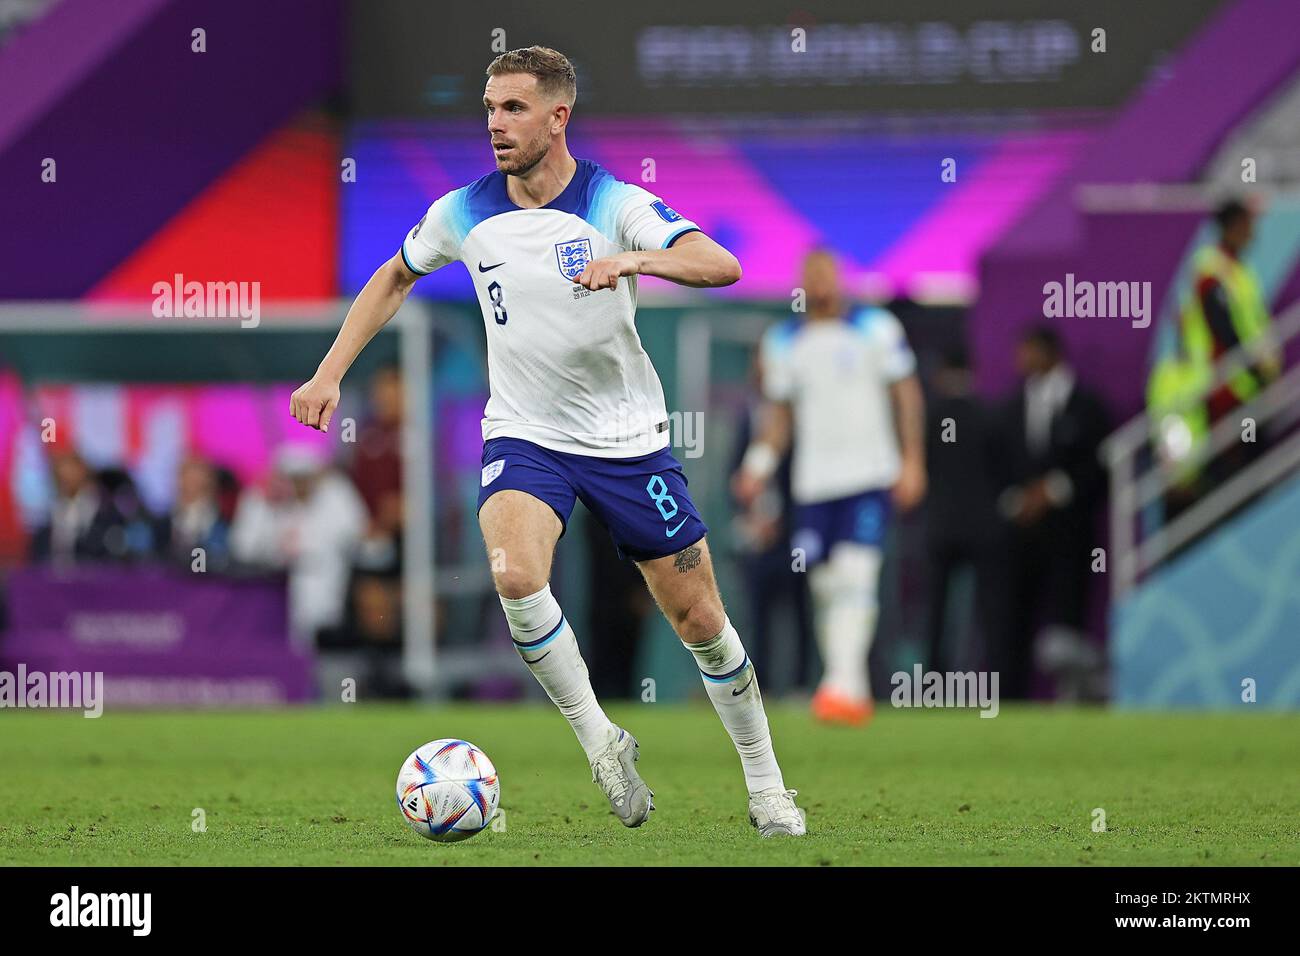 Doha, Qatar. 29th Nov, 2022. Jordan Henderson of England, during the match between Wales and England, for the 3rd round of Group B of the FIFA World Cup Qatar 2022, Ahmad bin Ali Stadium this Tuesday 29. 30761 (Heuler Andrey/SPP) Credit: SPP Sport Press Photo. /Alamy Live News Stock Photo